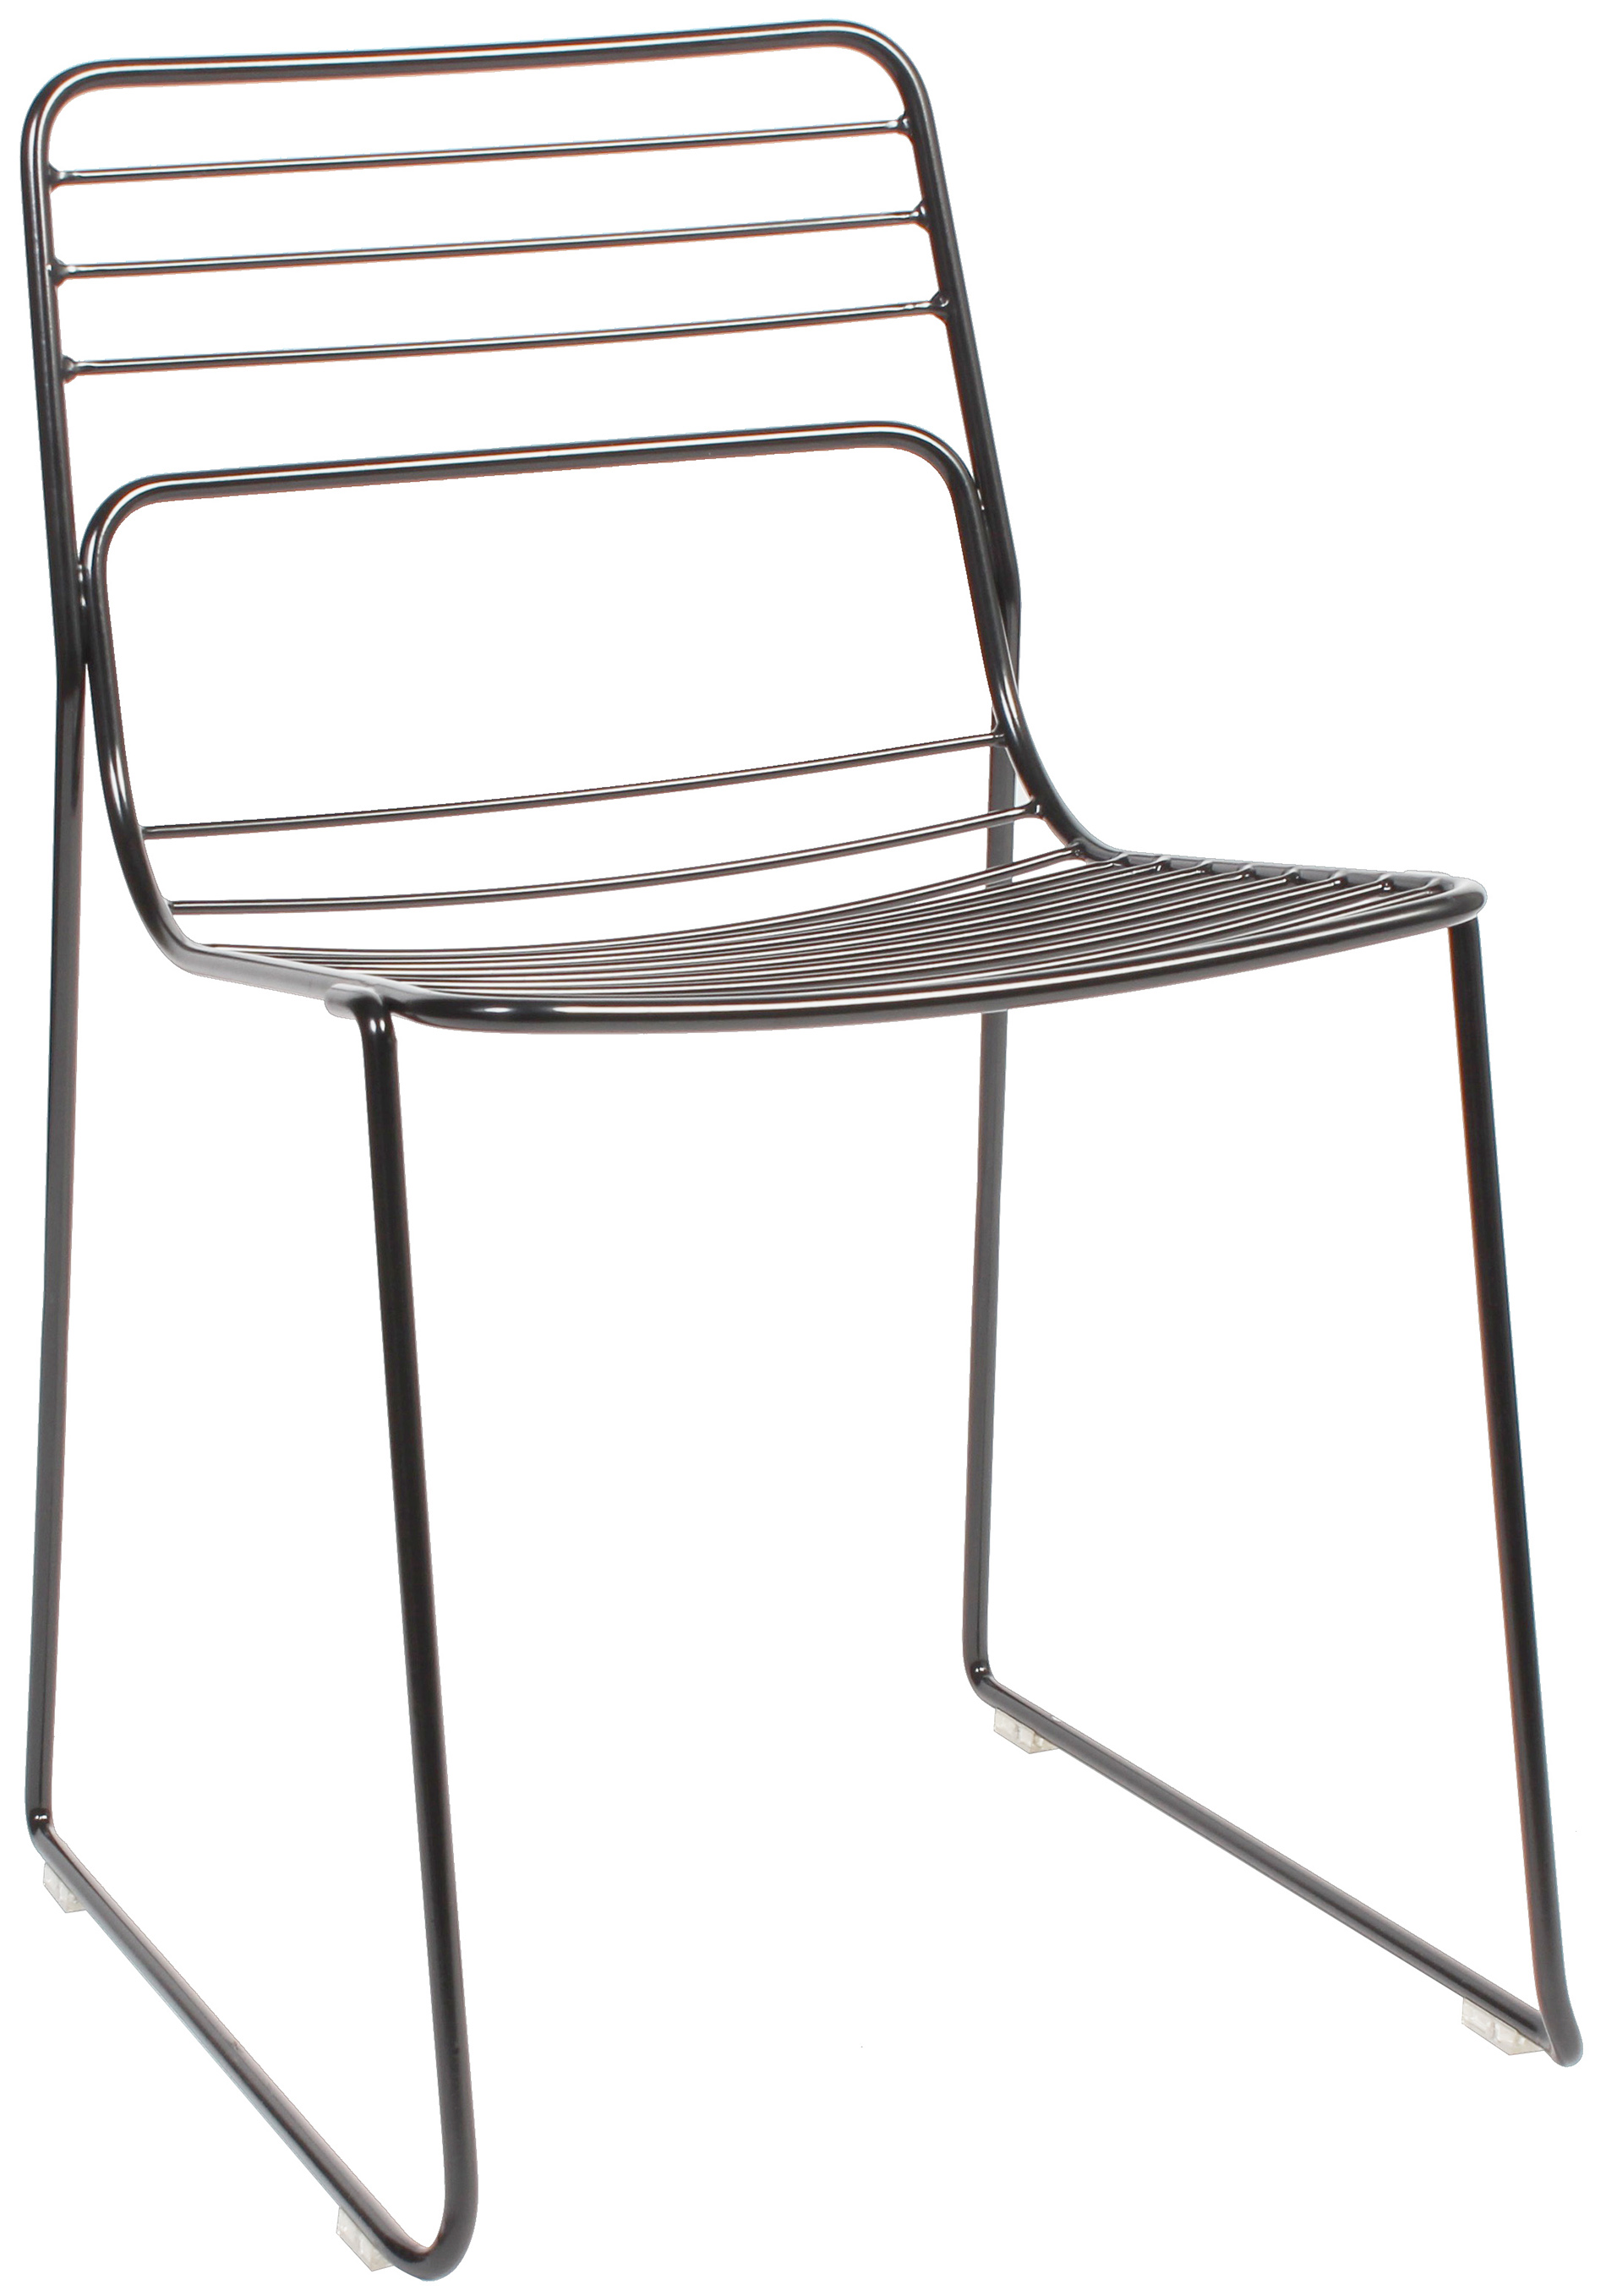 CHAIR CAGE EXCEL BLACK CHROME